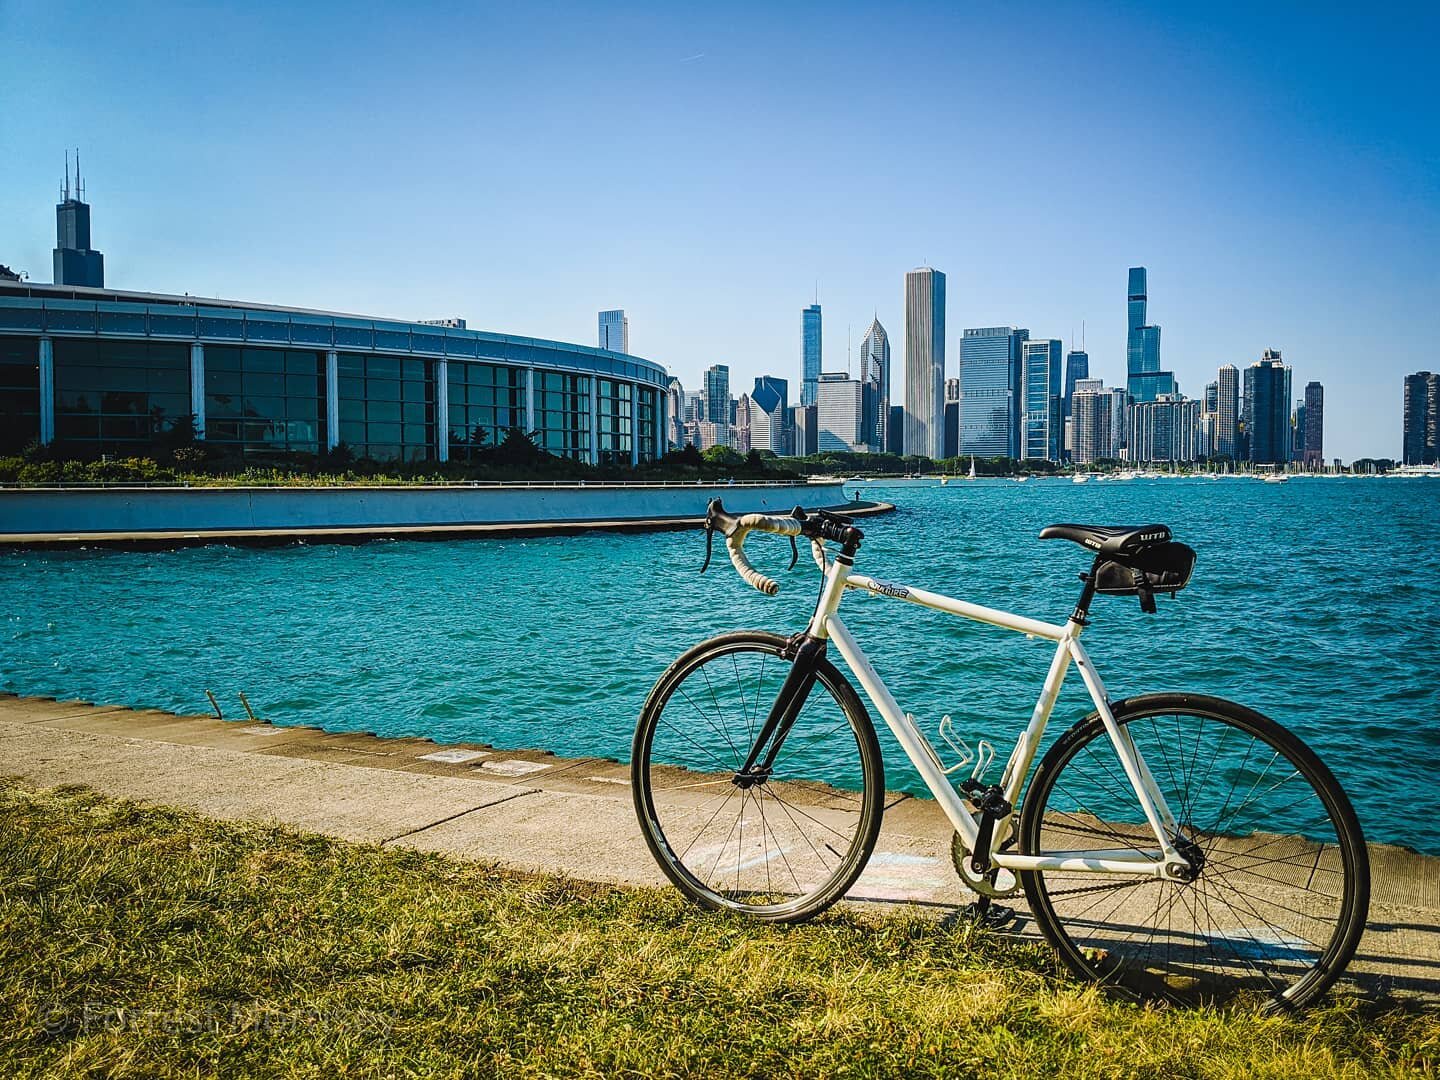 From Lincoln Park to the Adler Planatarium and back. The Flat Lands are a Fixie Playground.